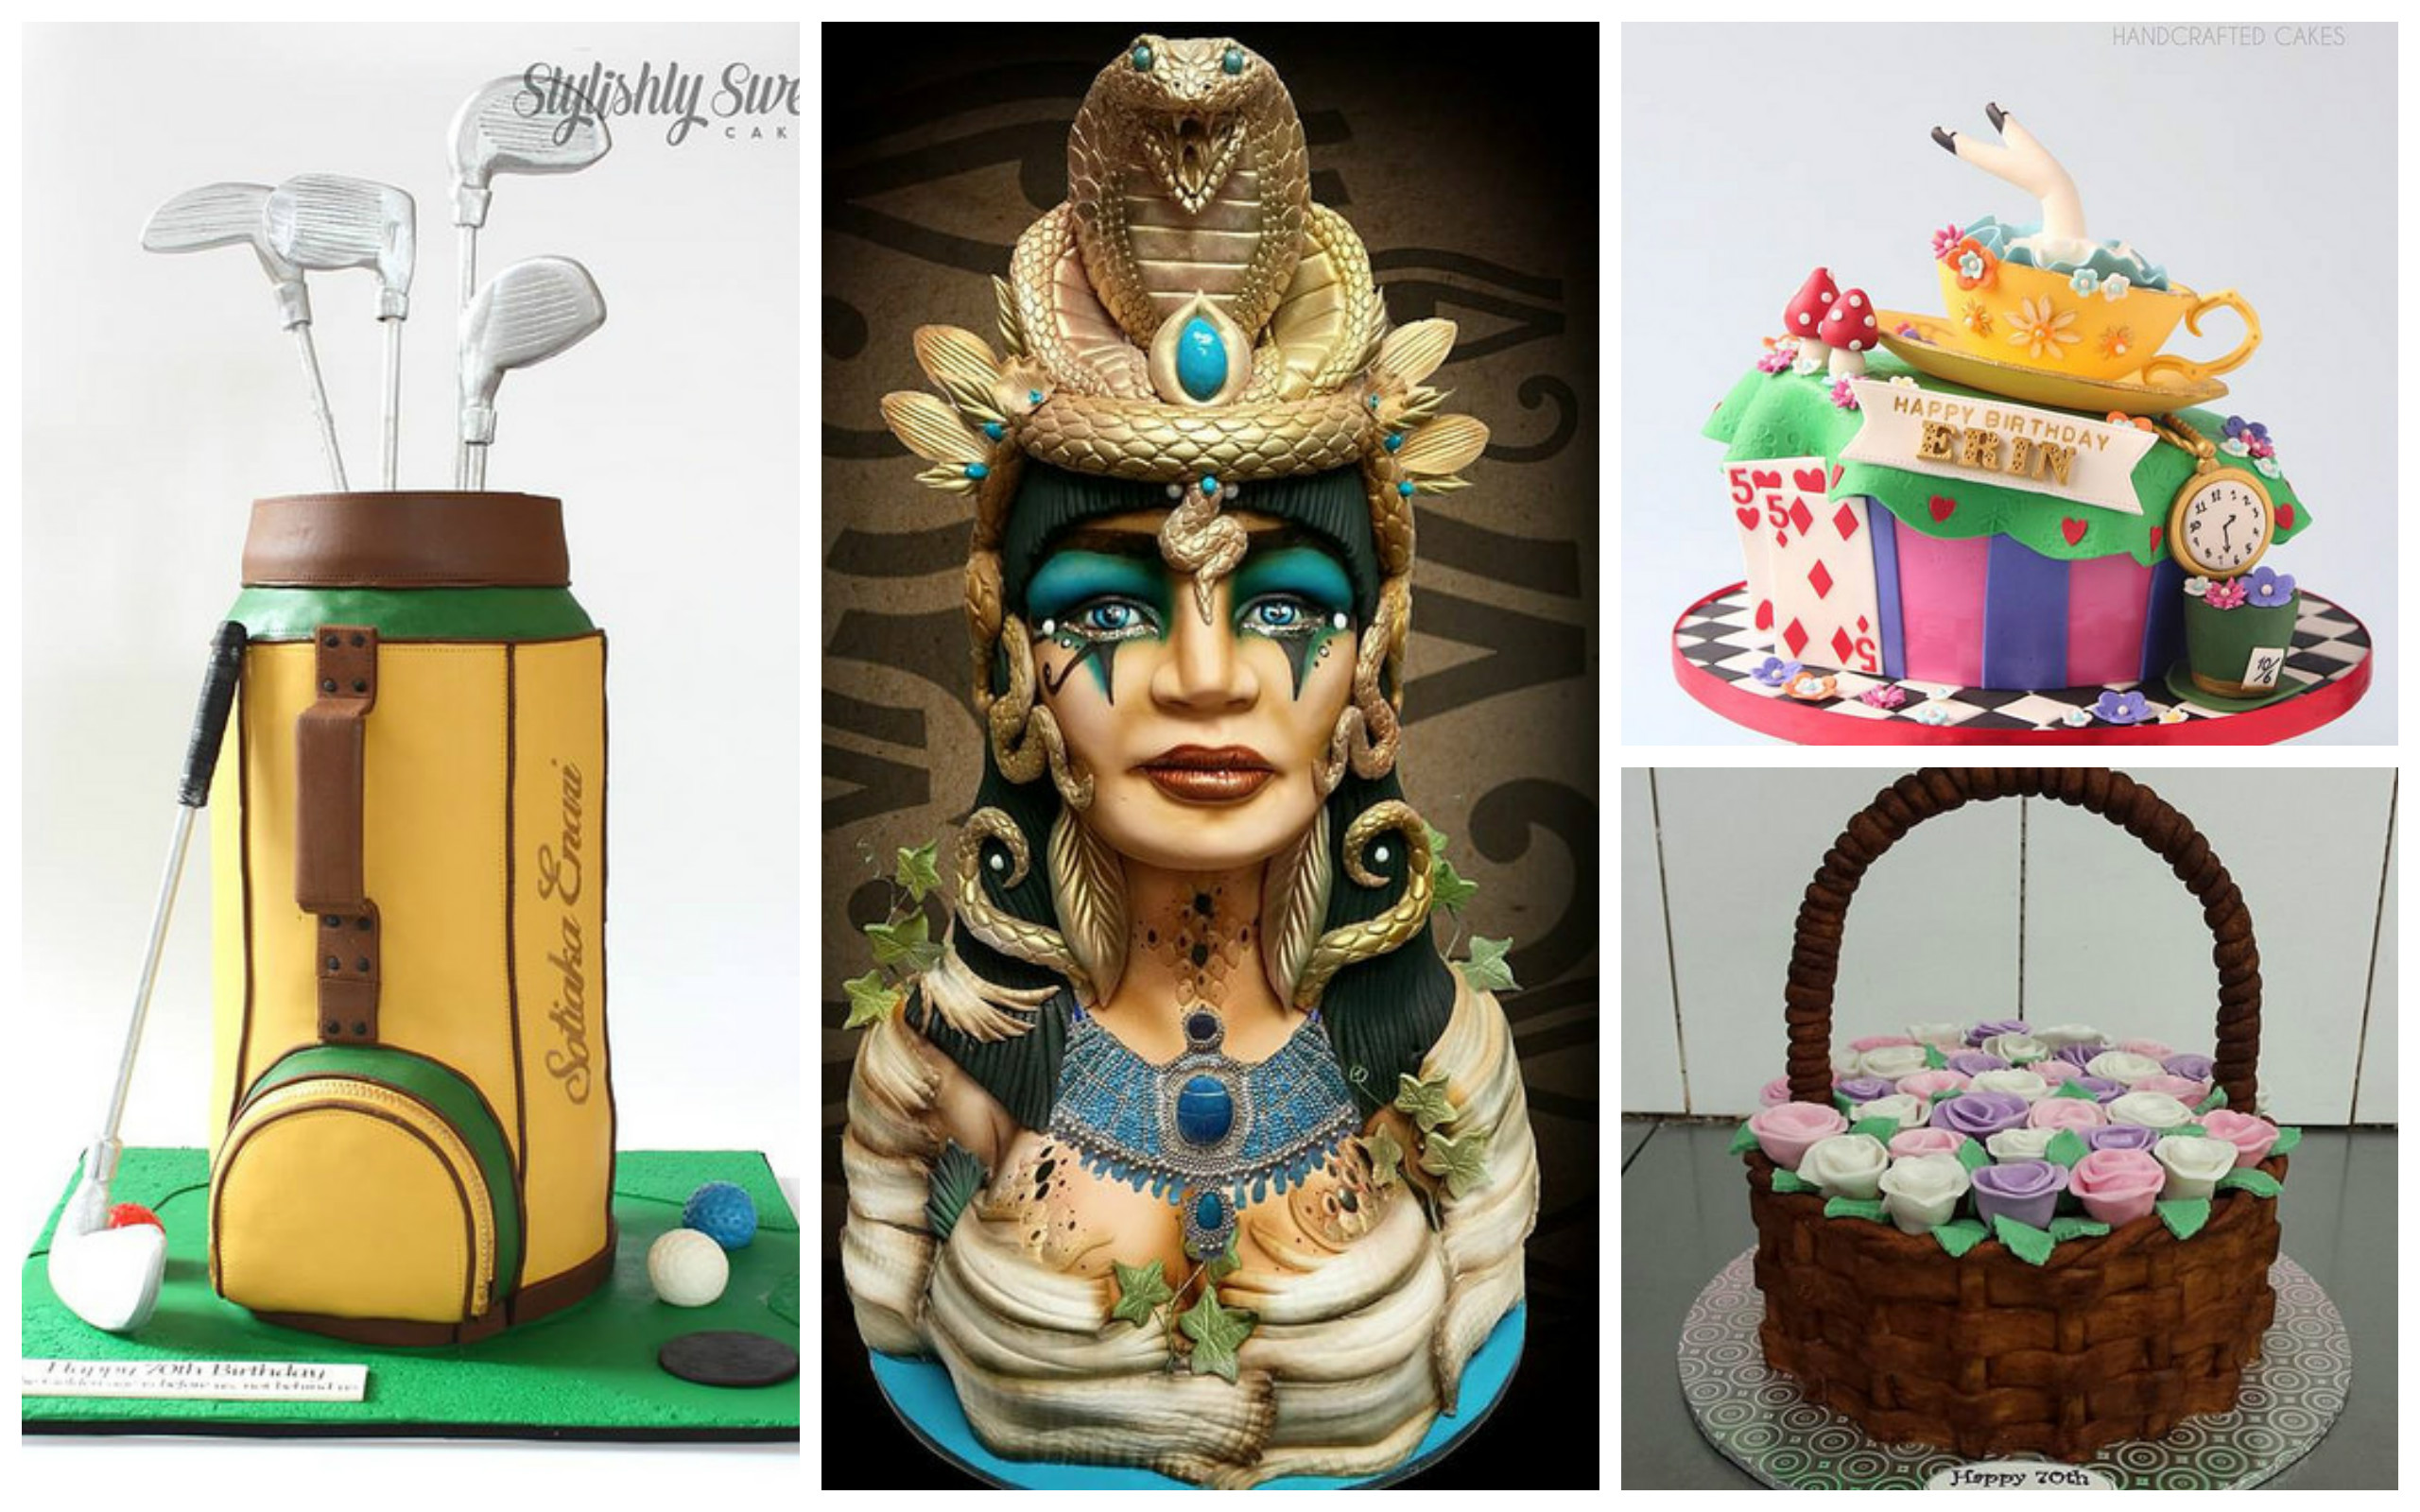 Competition: World's Most Trusted Cake Designer - Page 13 of 16